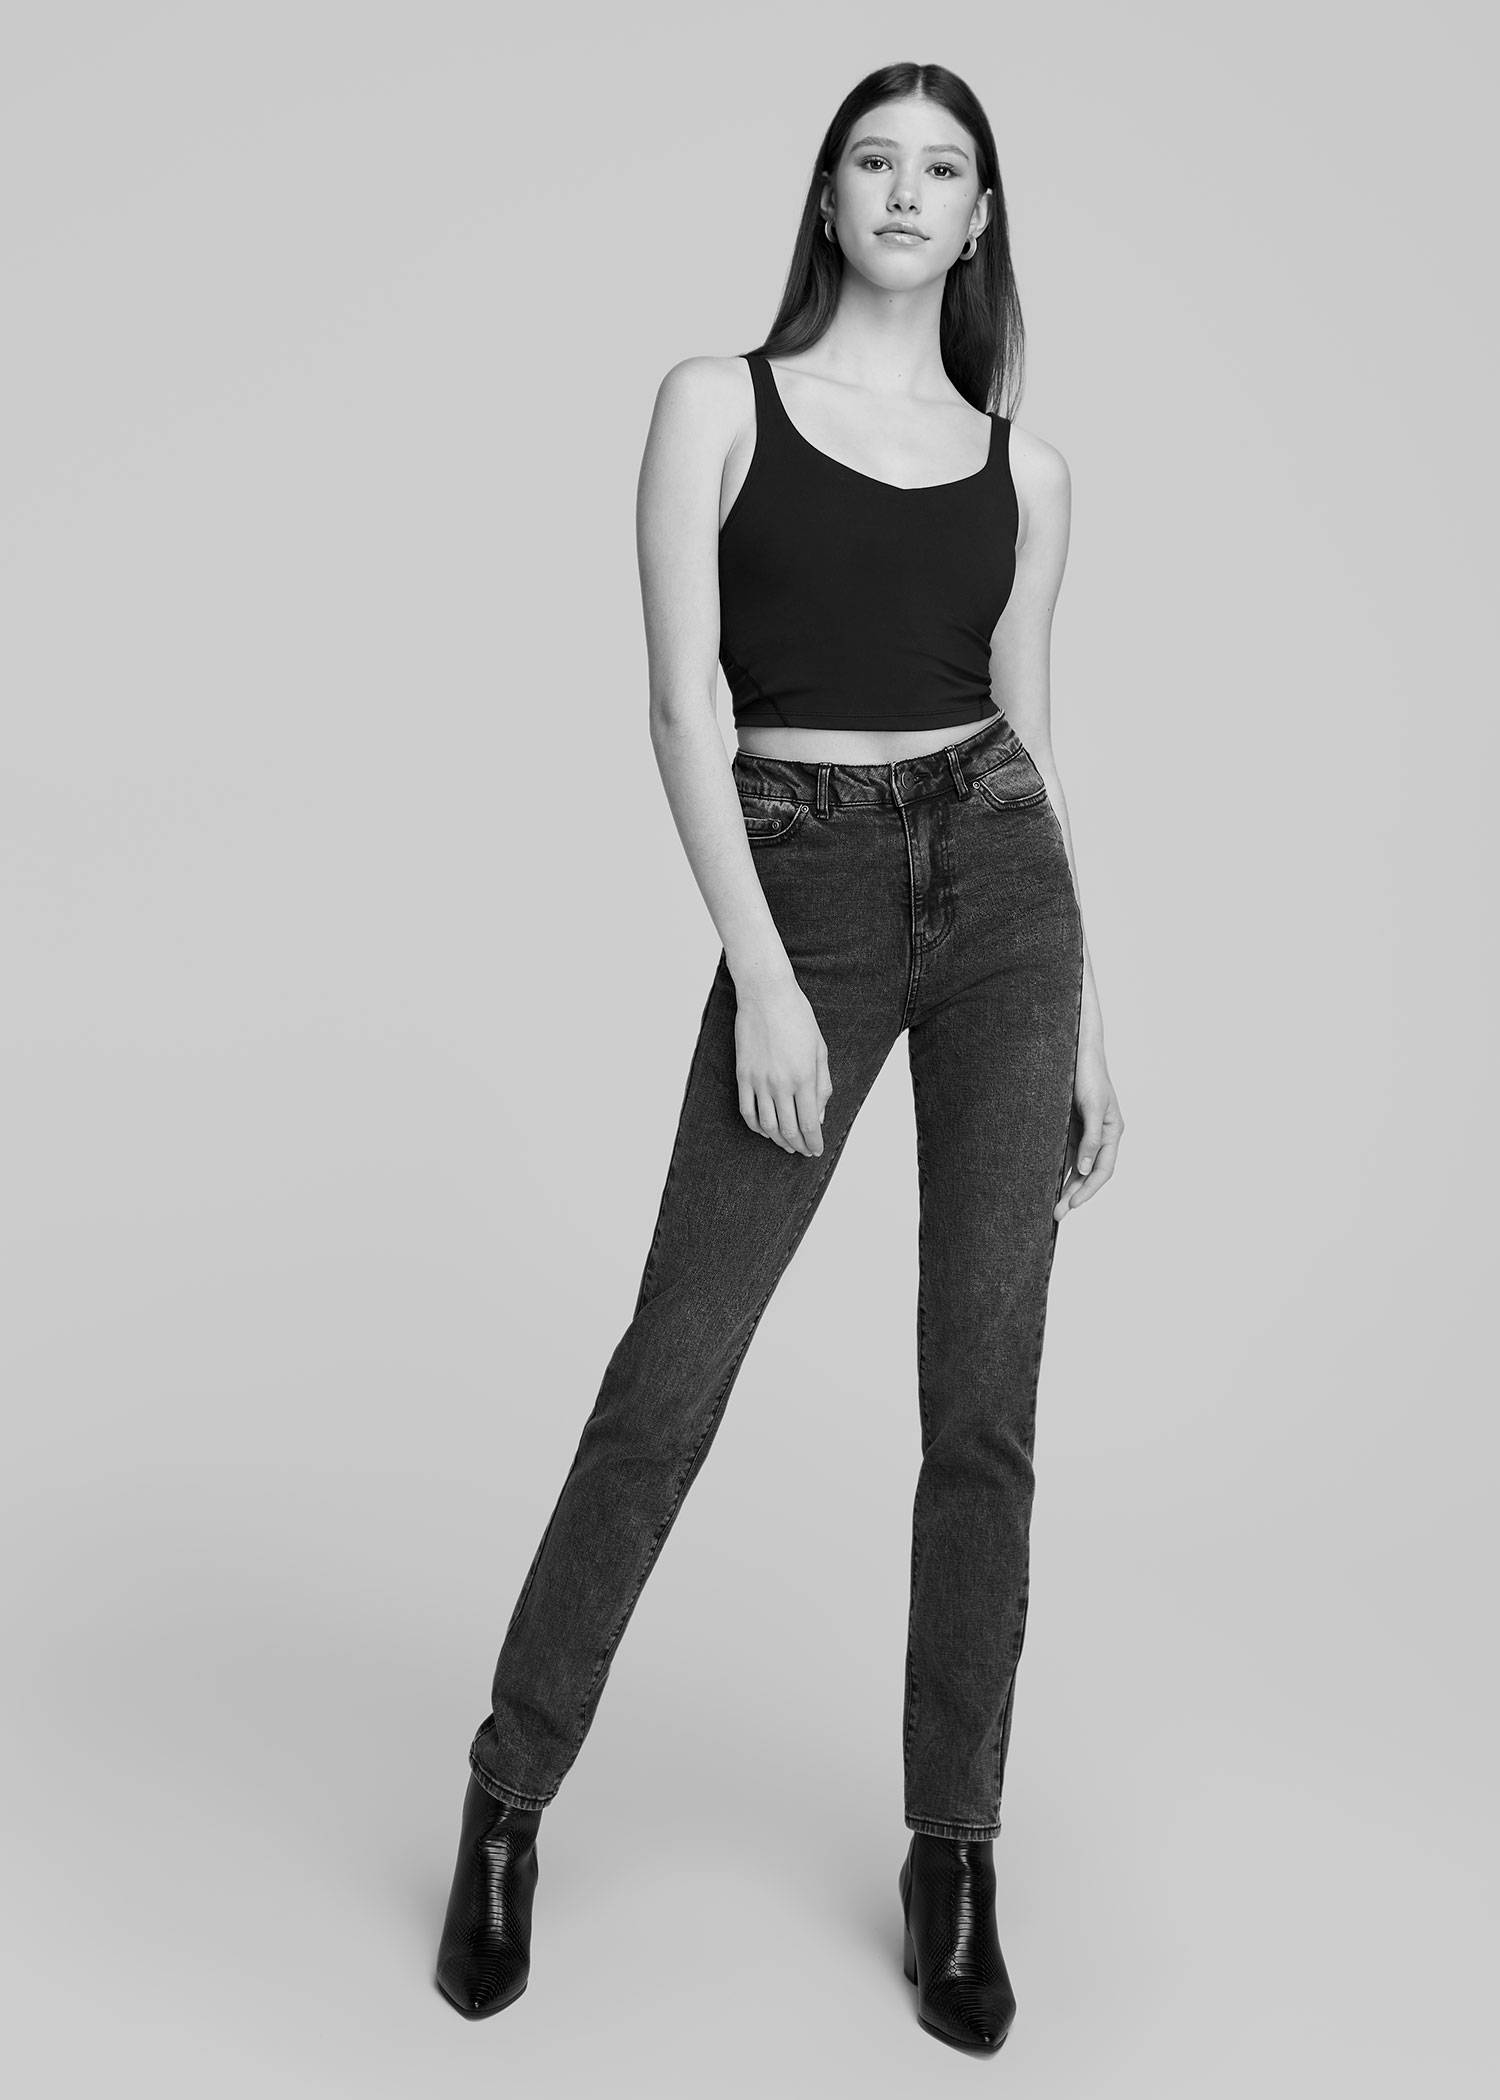 Tall woman wearing a black tank top and black jeans in black and white